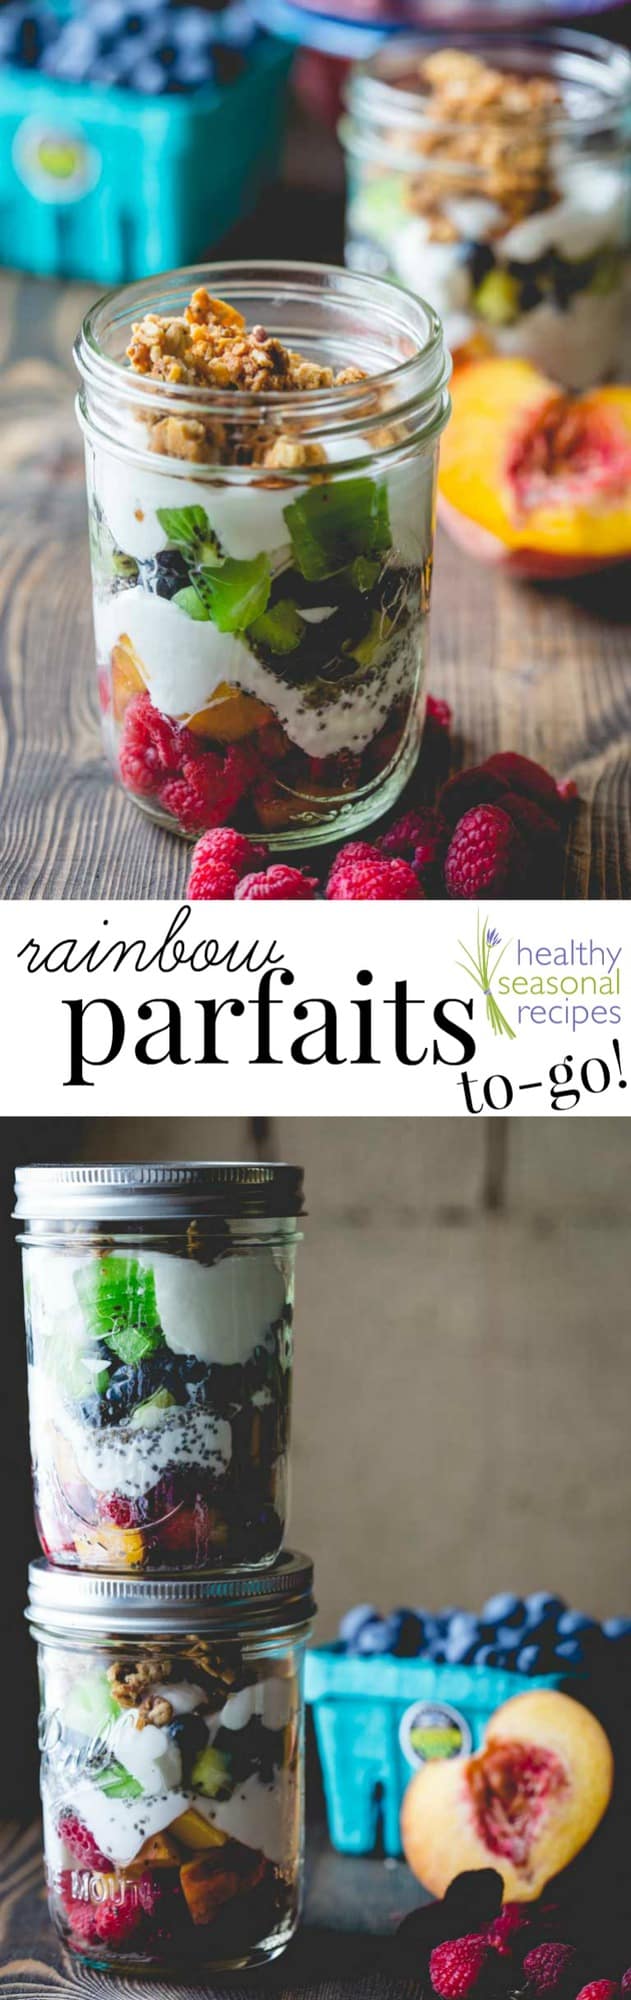 jar parfaits photo collage with text